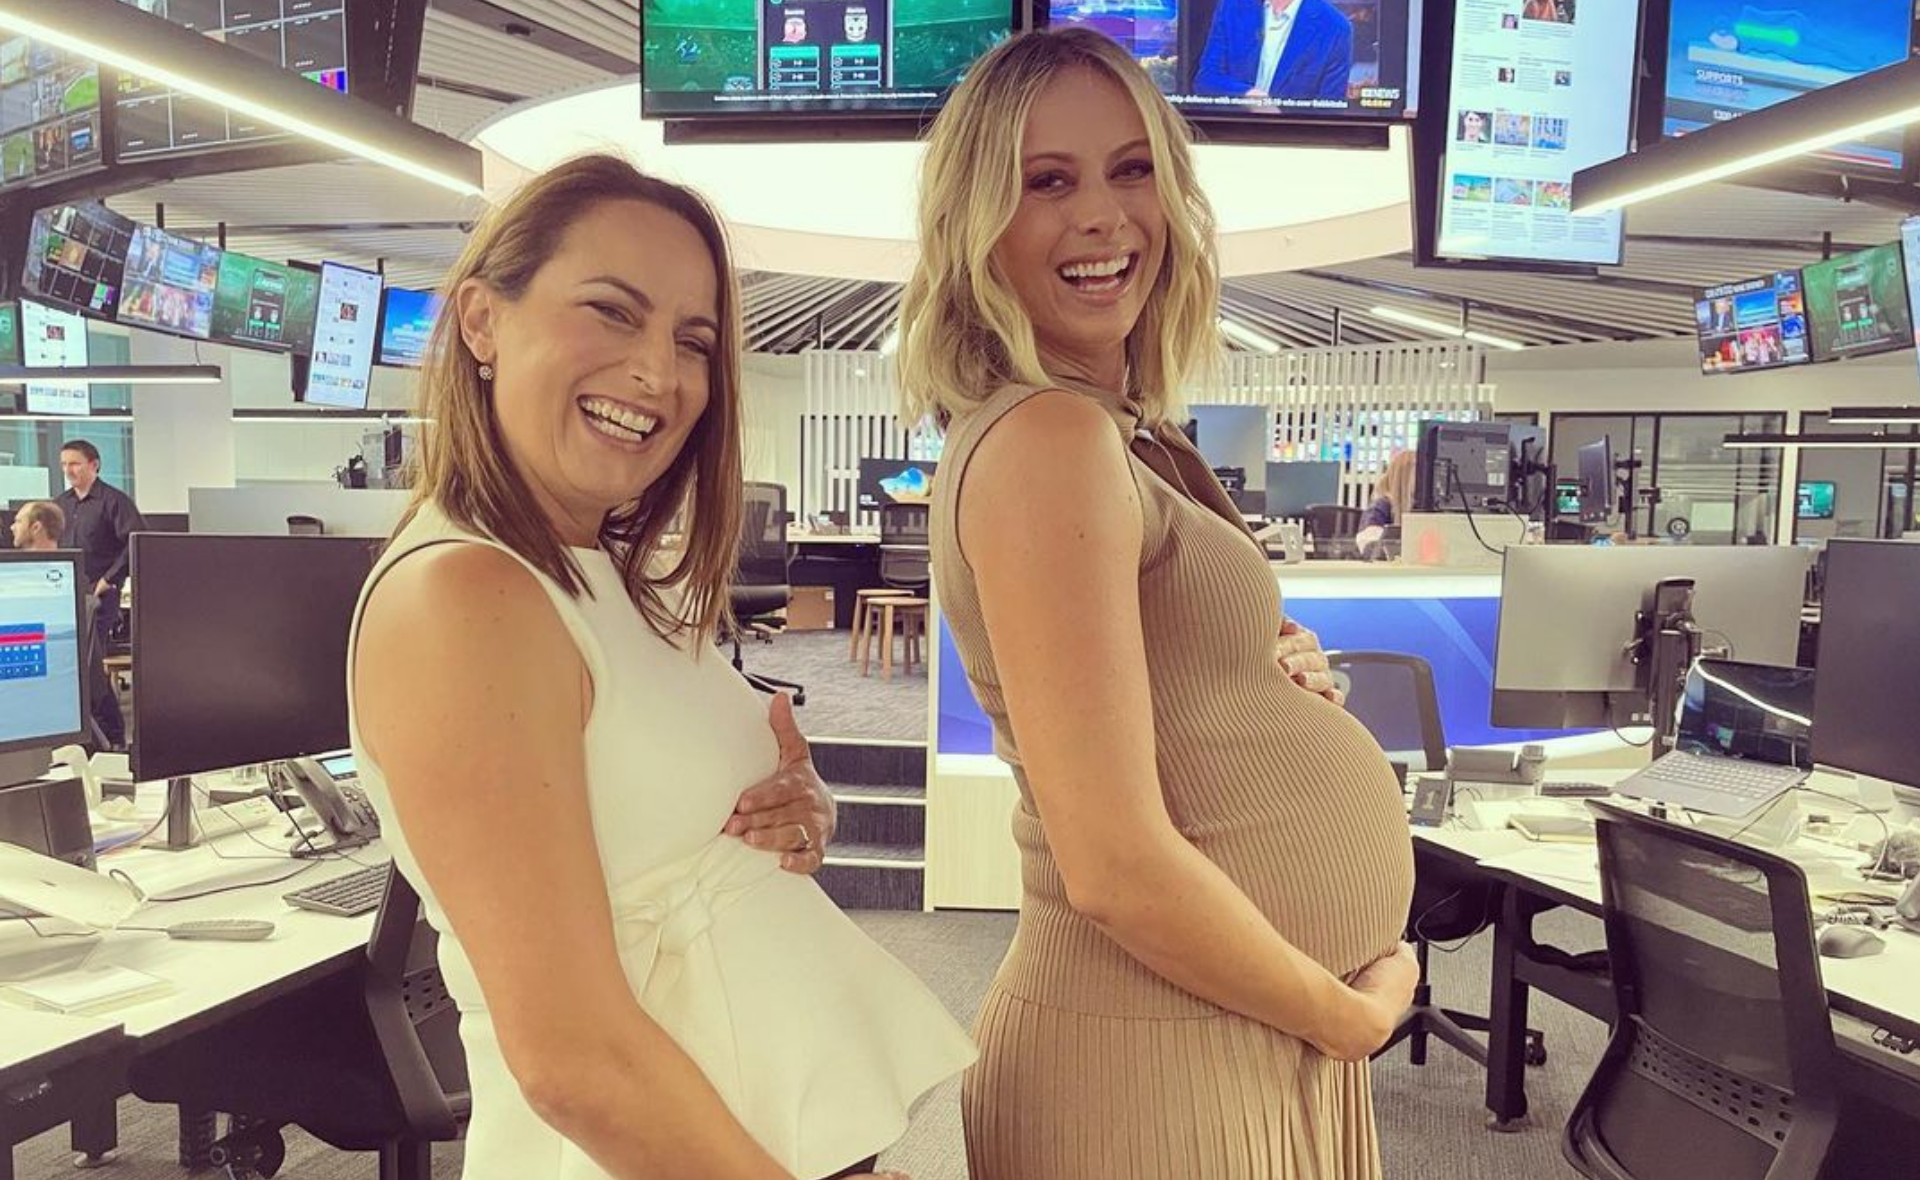 Work-wives Jayne Azzopardi and Sylvia Jeffreys mark a special milestone as they both prepare to welcome baby boys